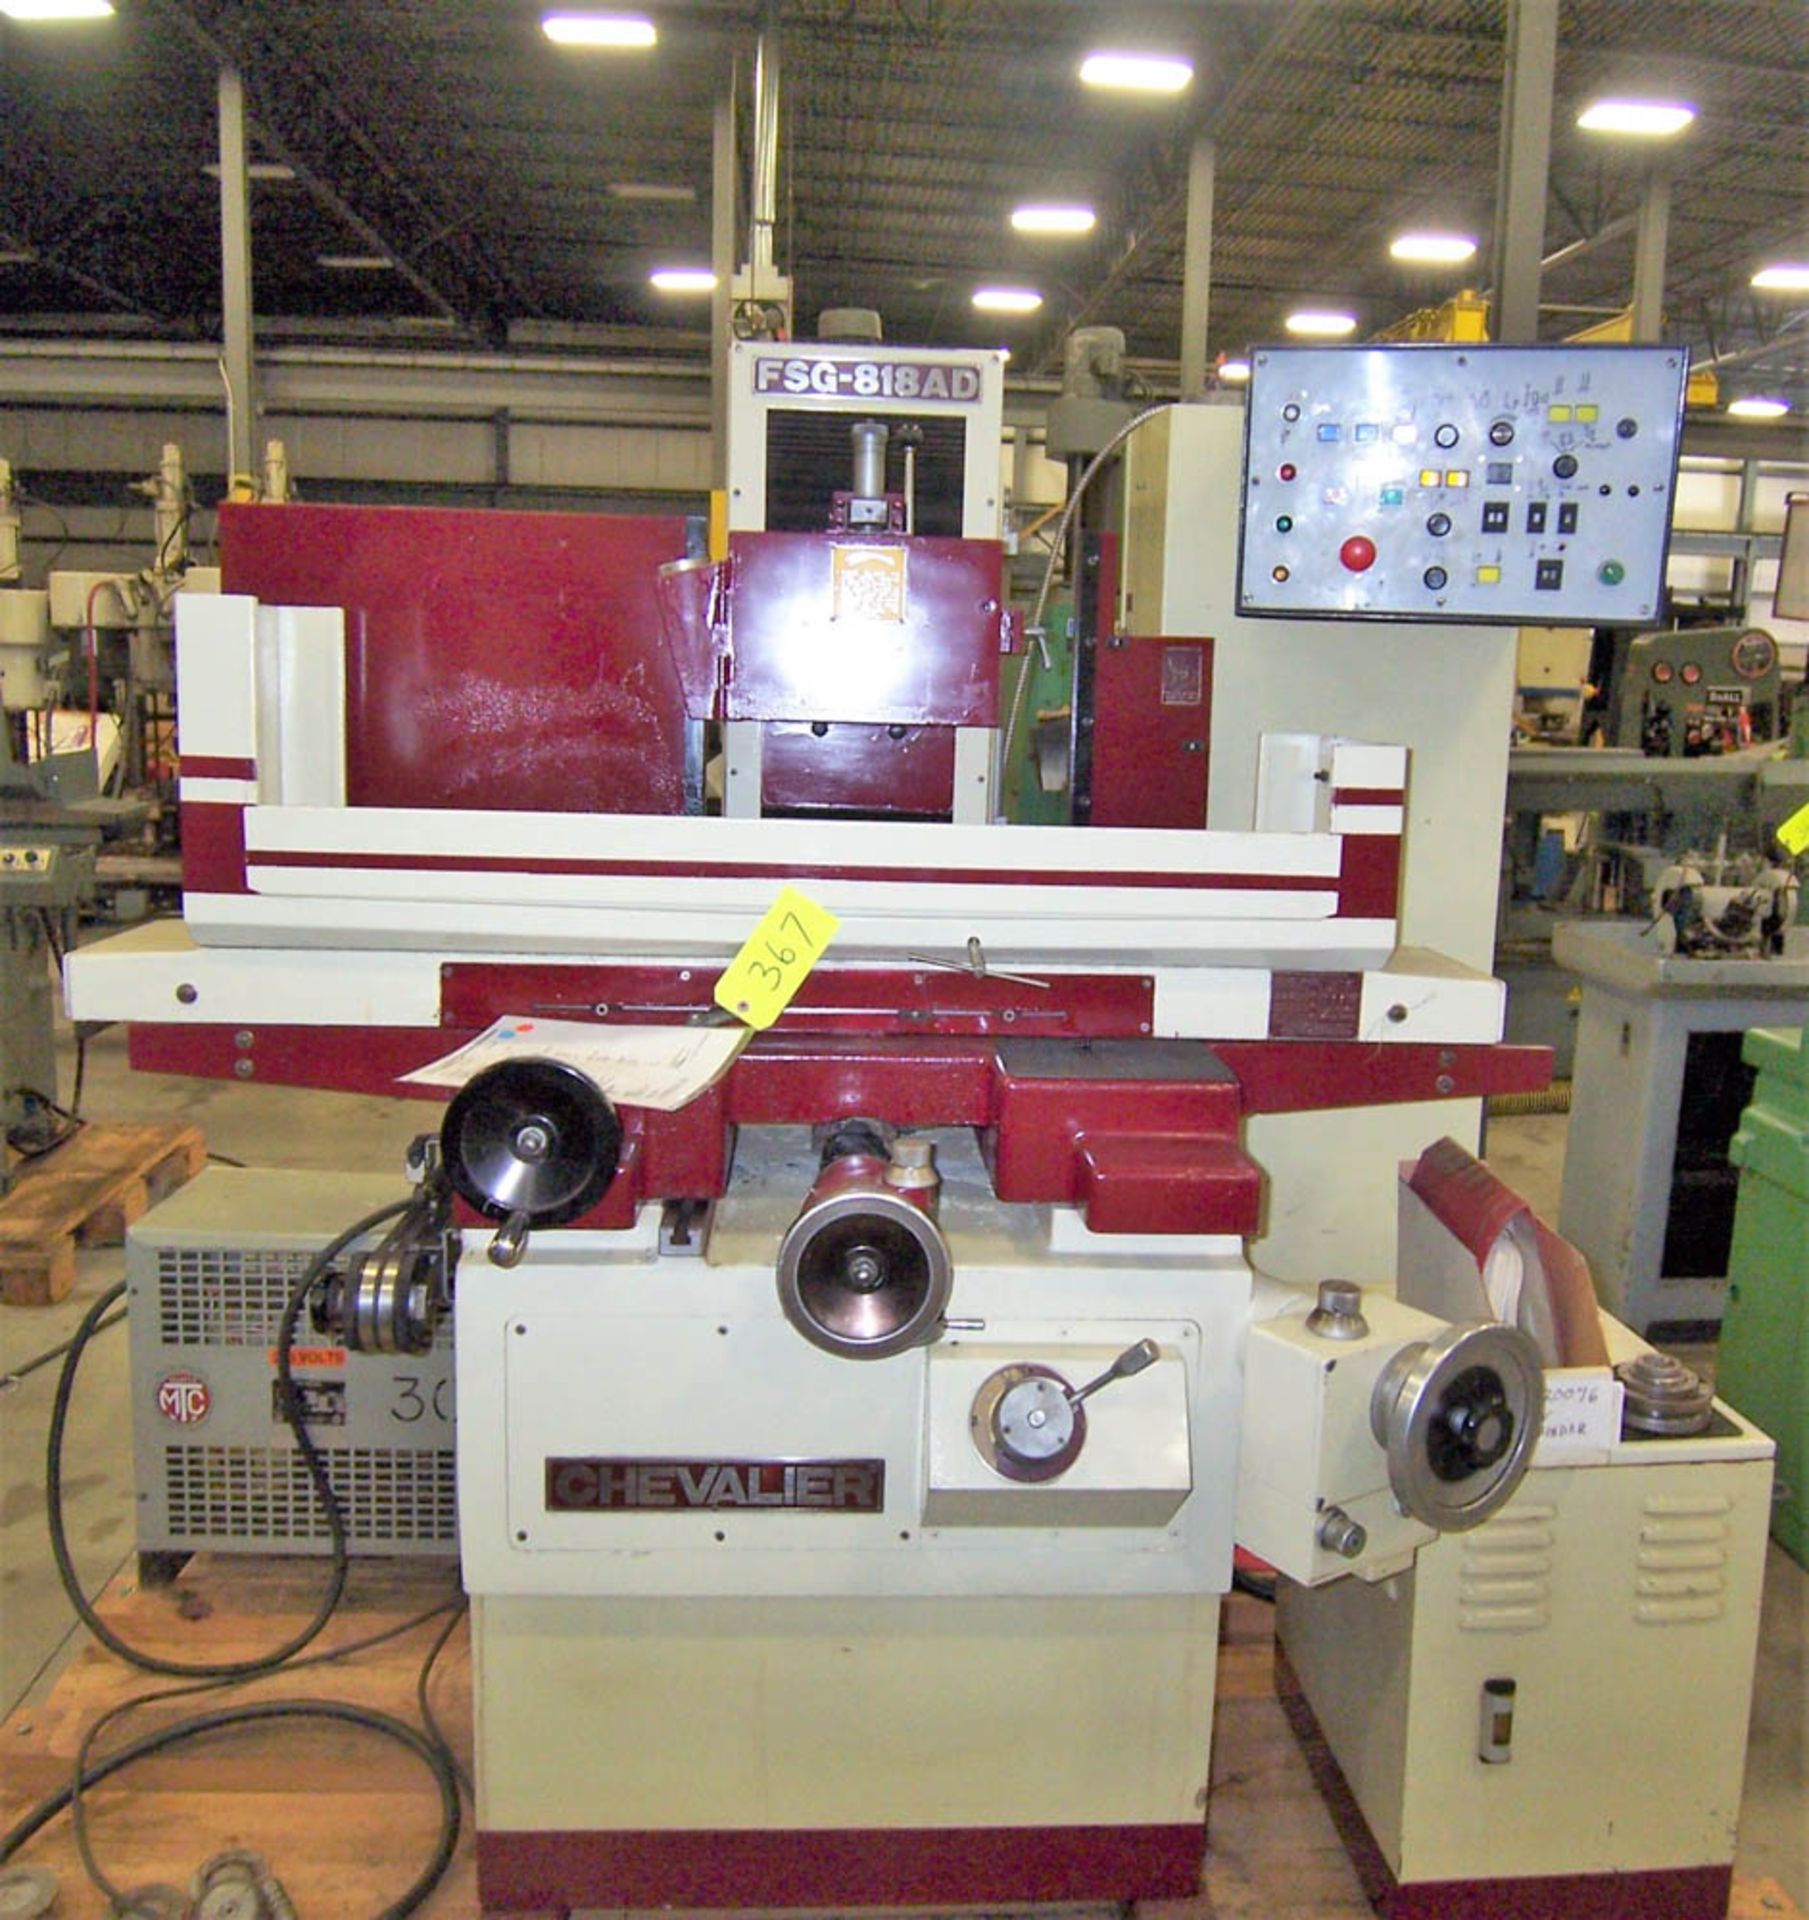 CHEVALIER MODEL FSG-818AD 3-AXIS HYDRAULIC SURFACE GRINDER, 8" X 18" TABLE SIZE, 18" MAXIMUM